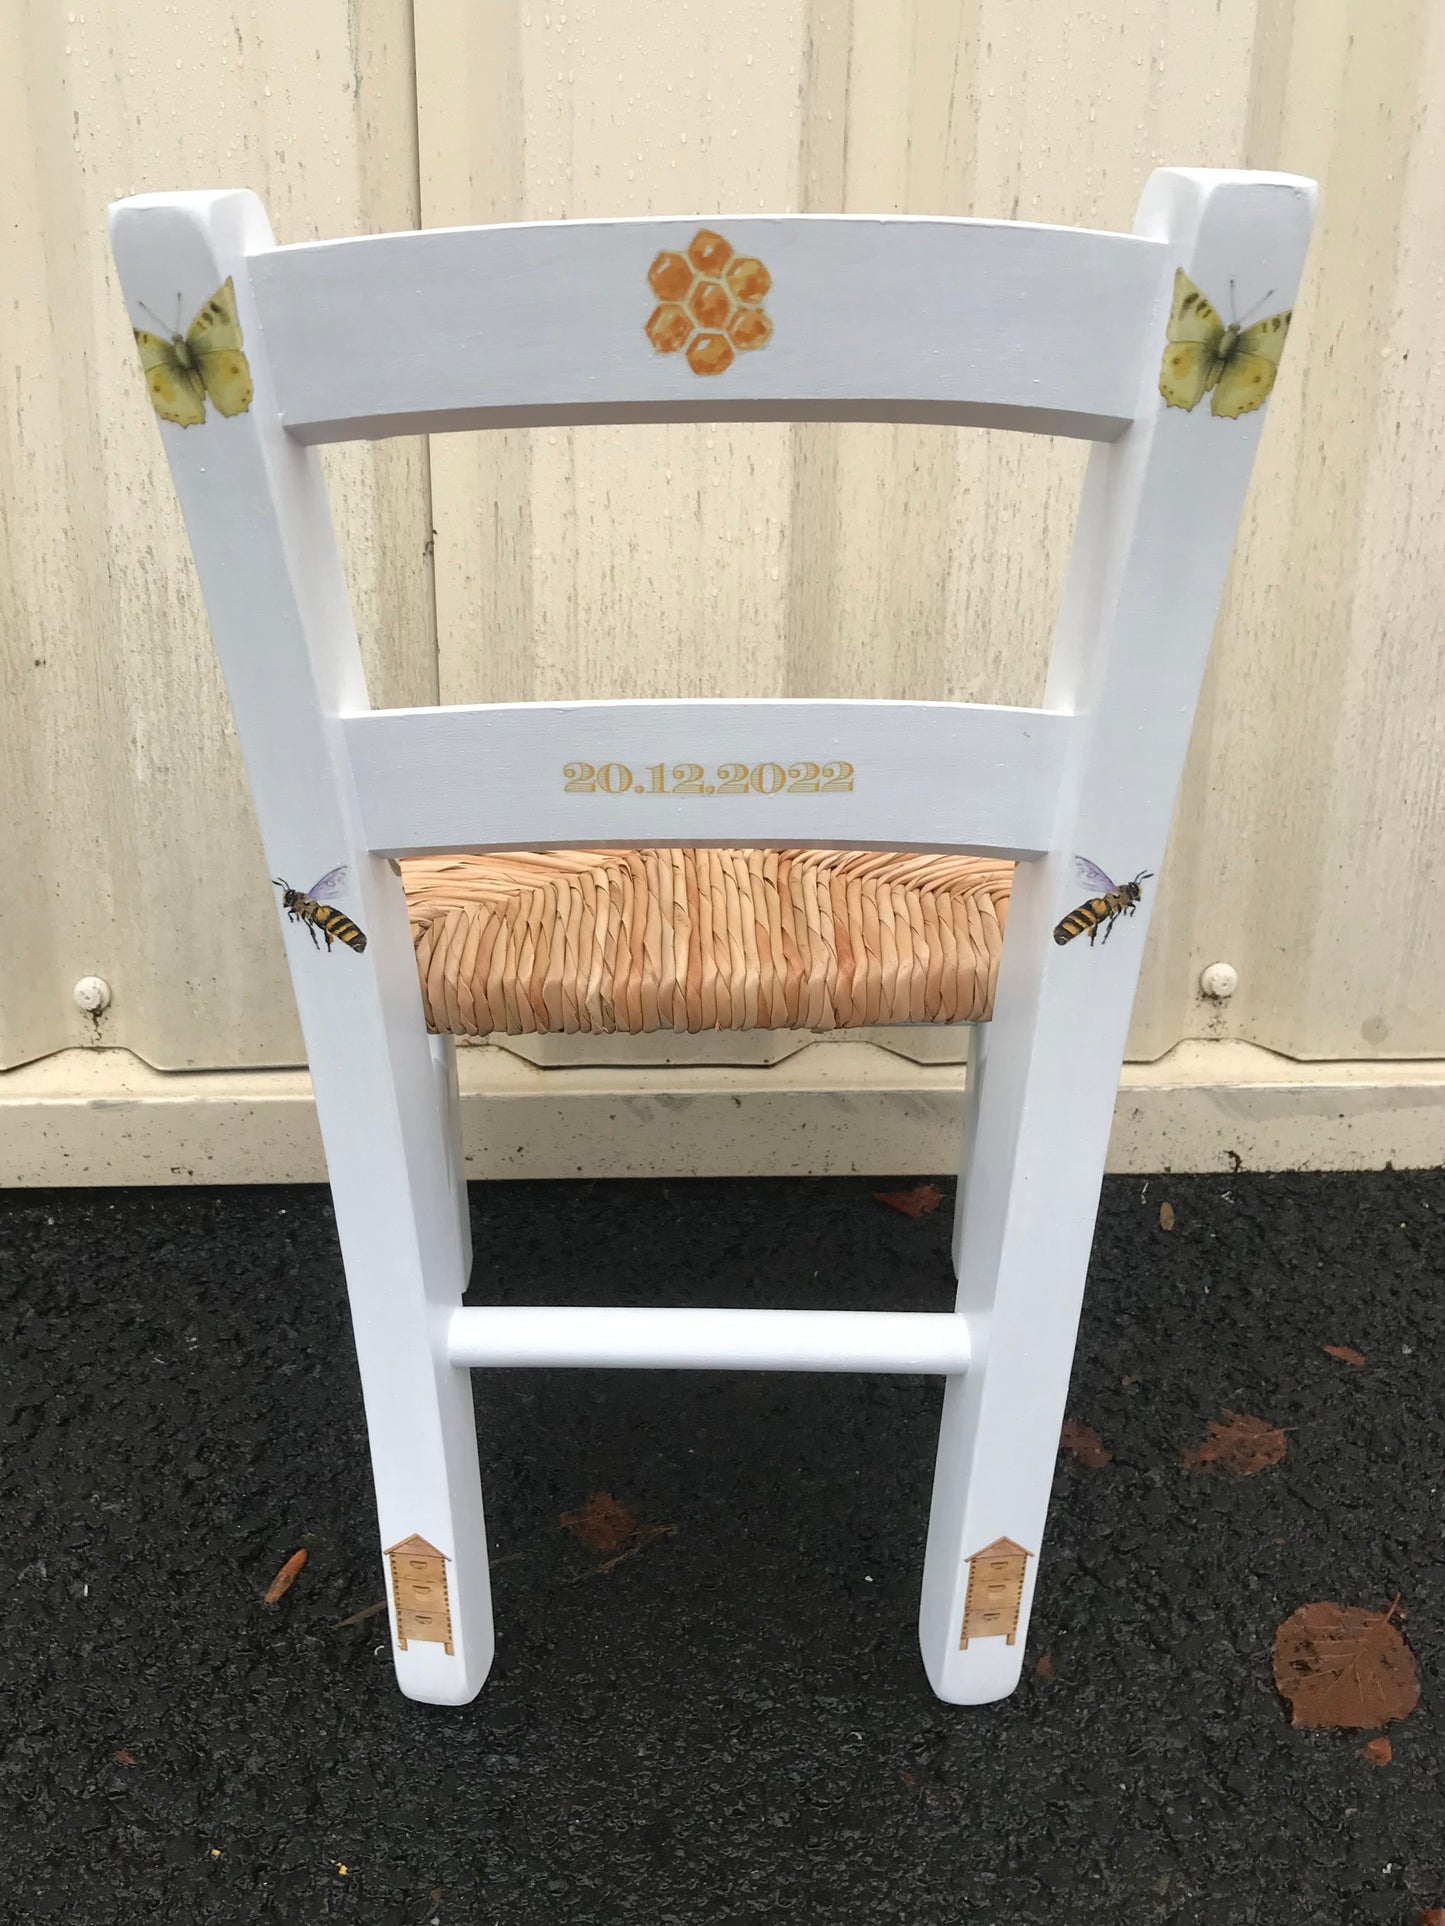 Commission for Kate - personalised children's chair bee keeper theme